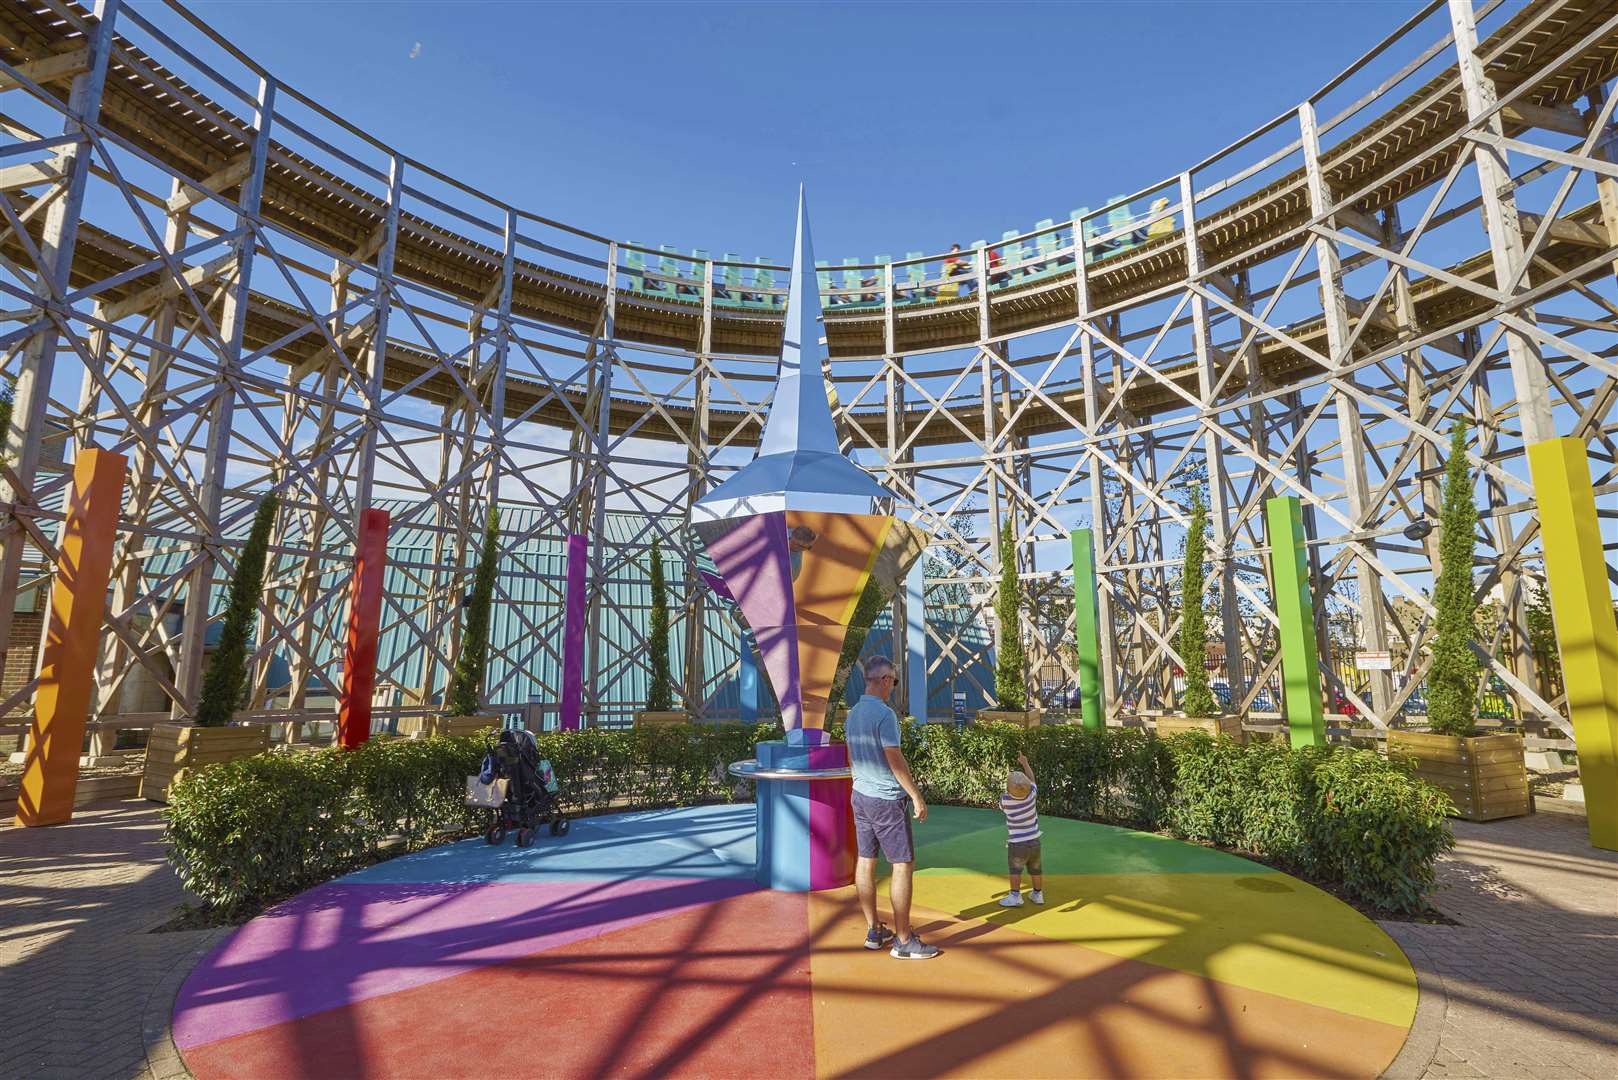 Dreamland has attracted visitors for decades